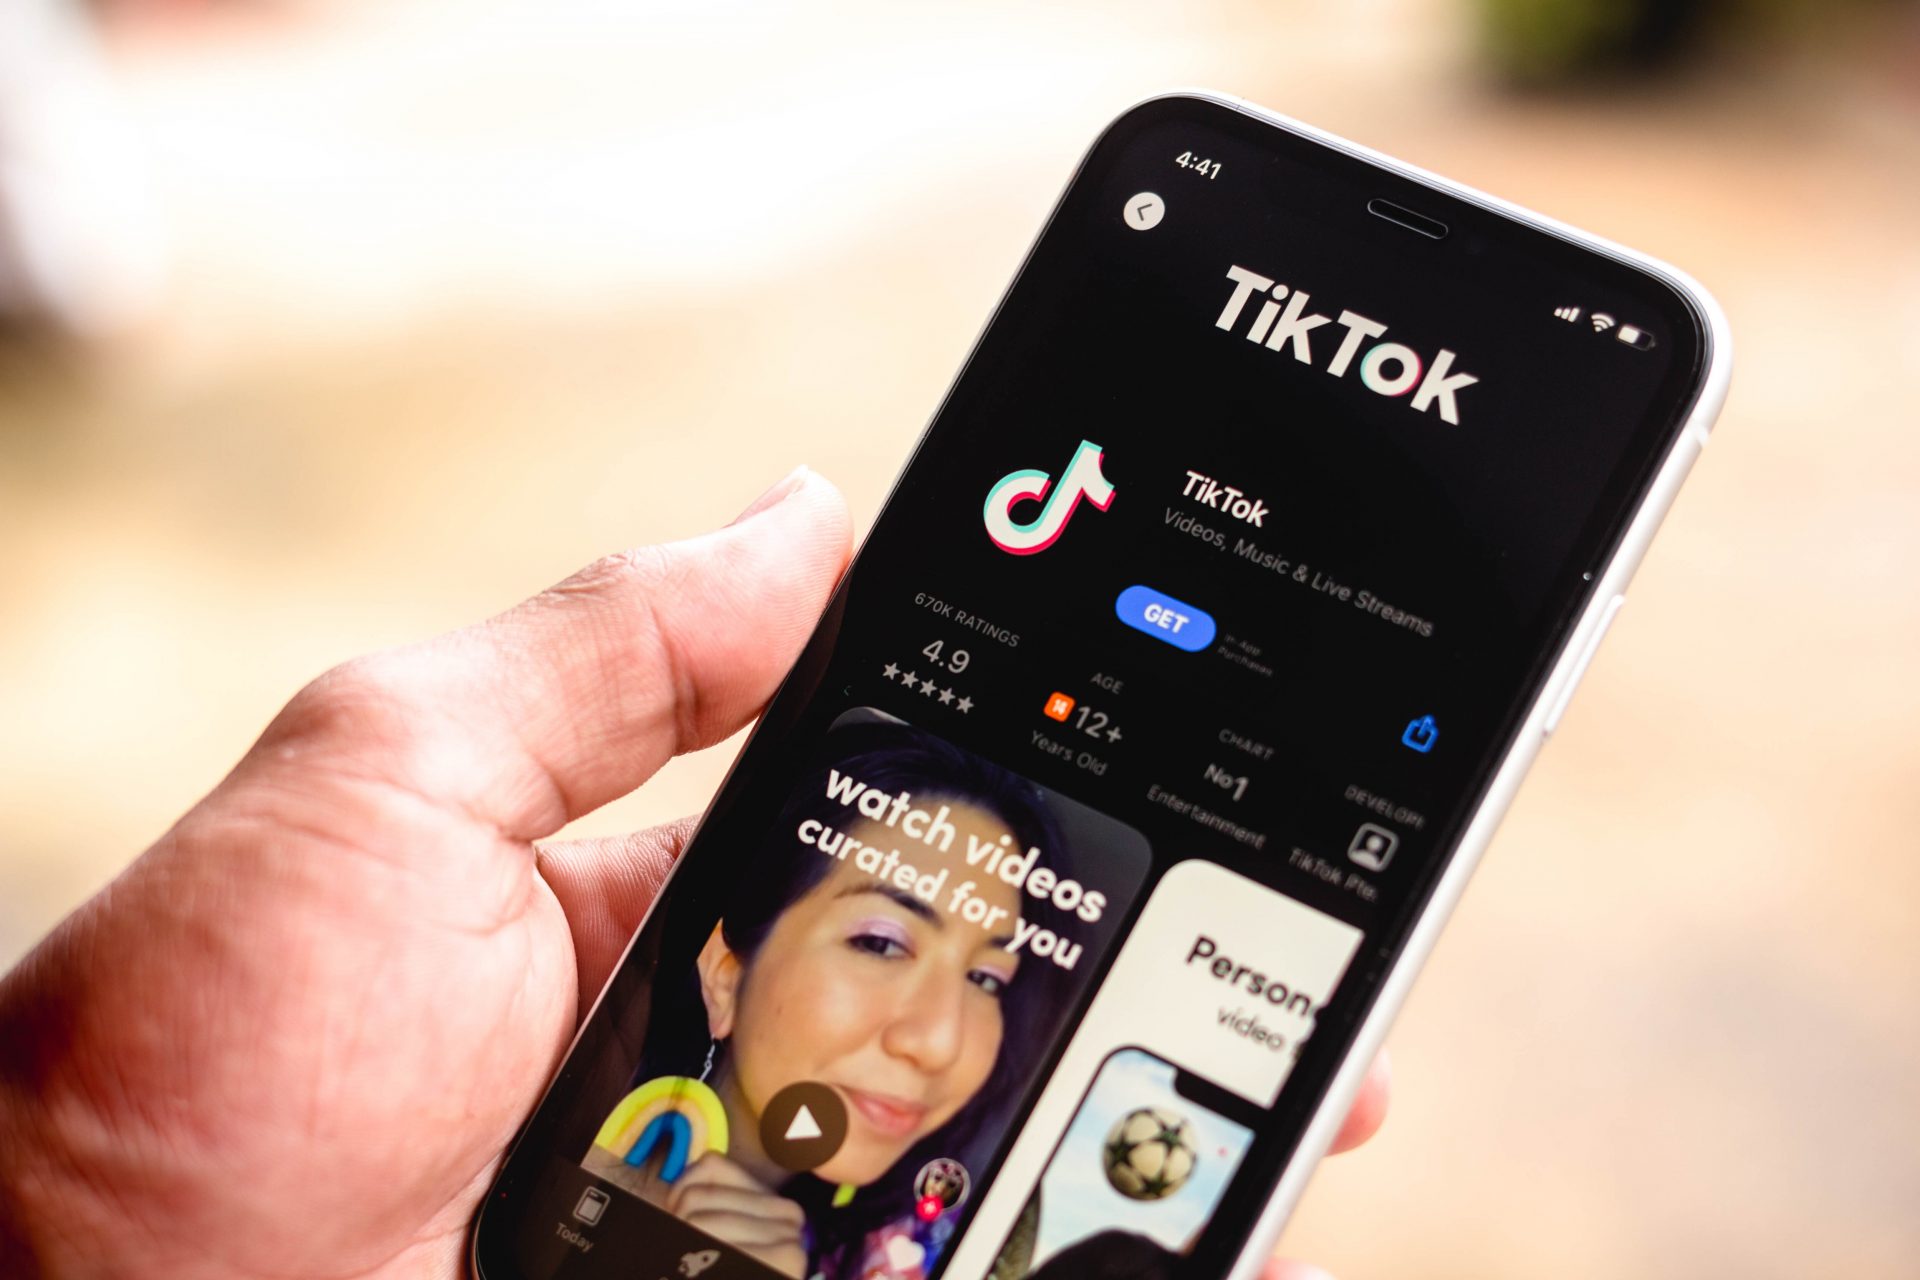 TikTok’s AI is now available to other companies